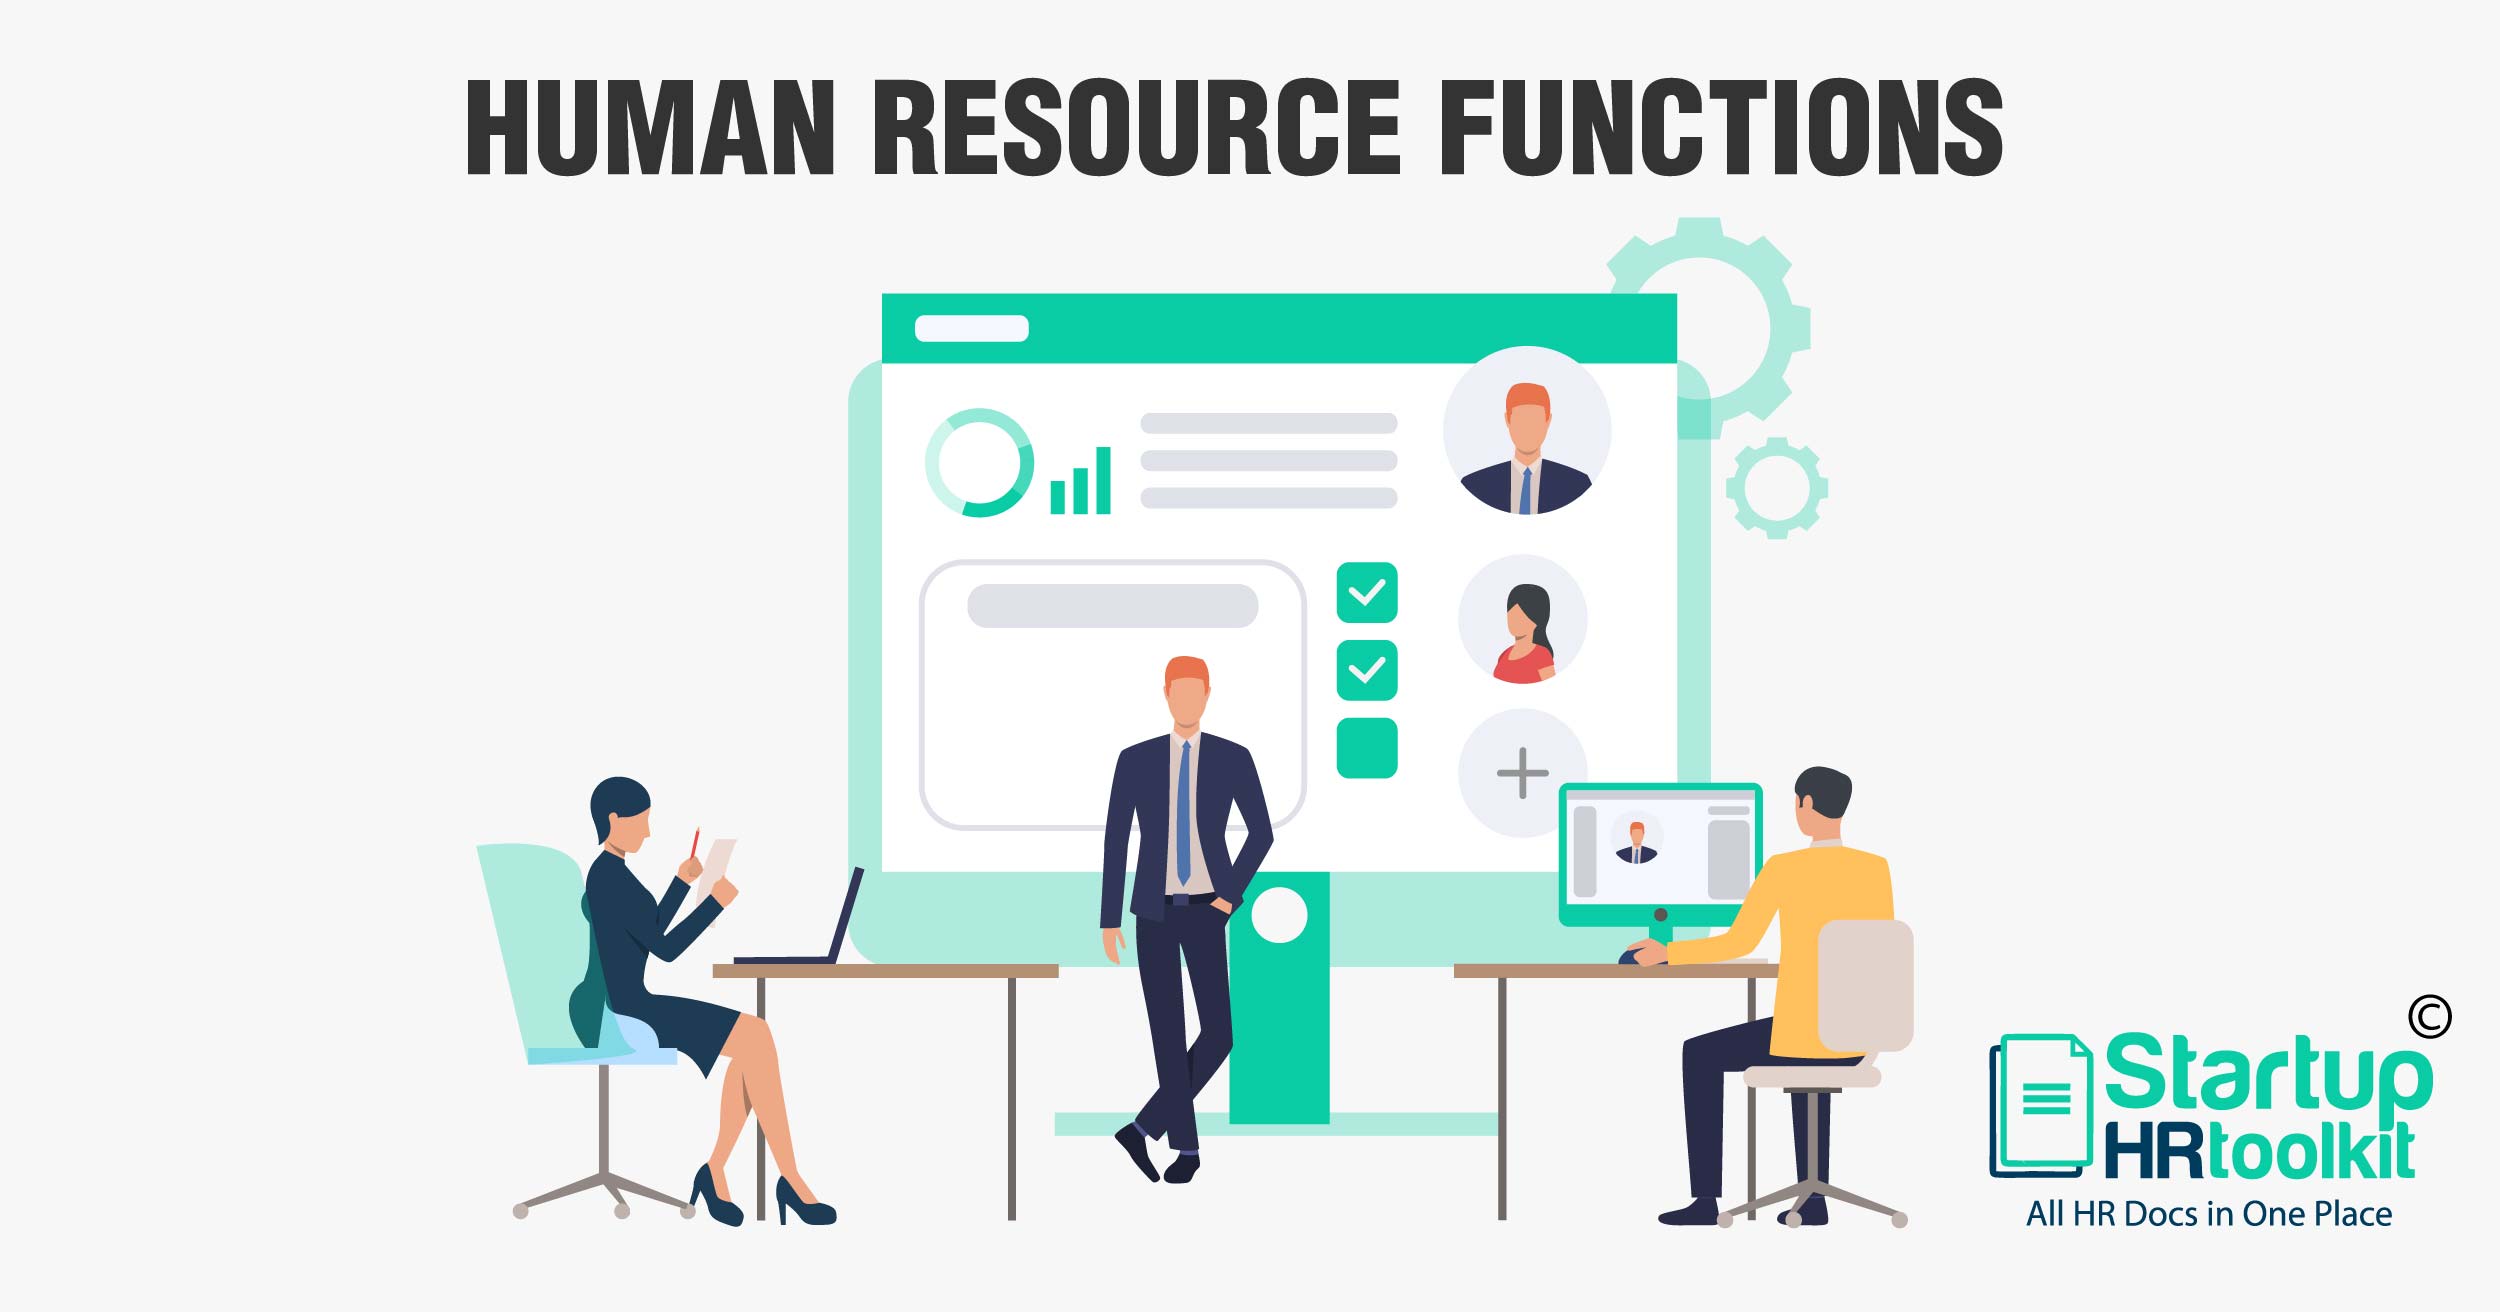 Key Functions of the Human Resource Department